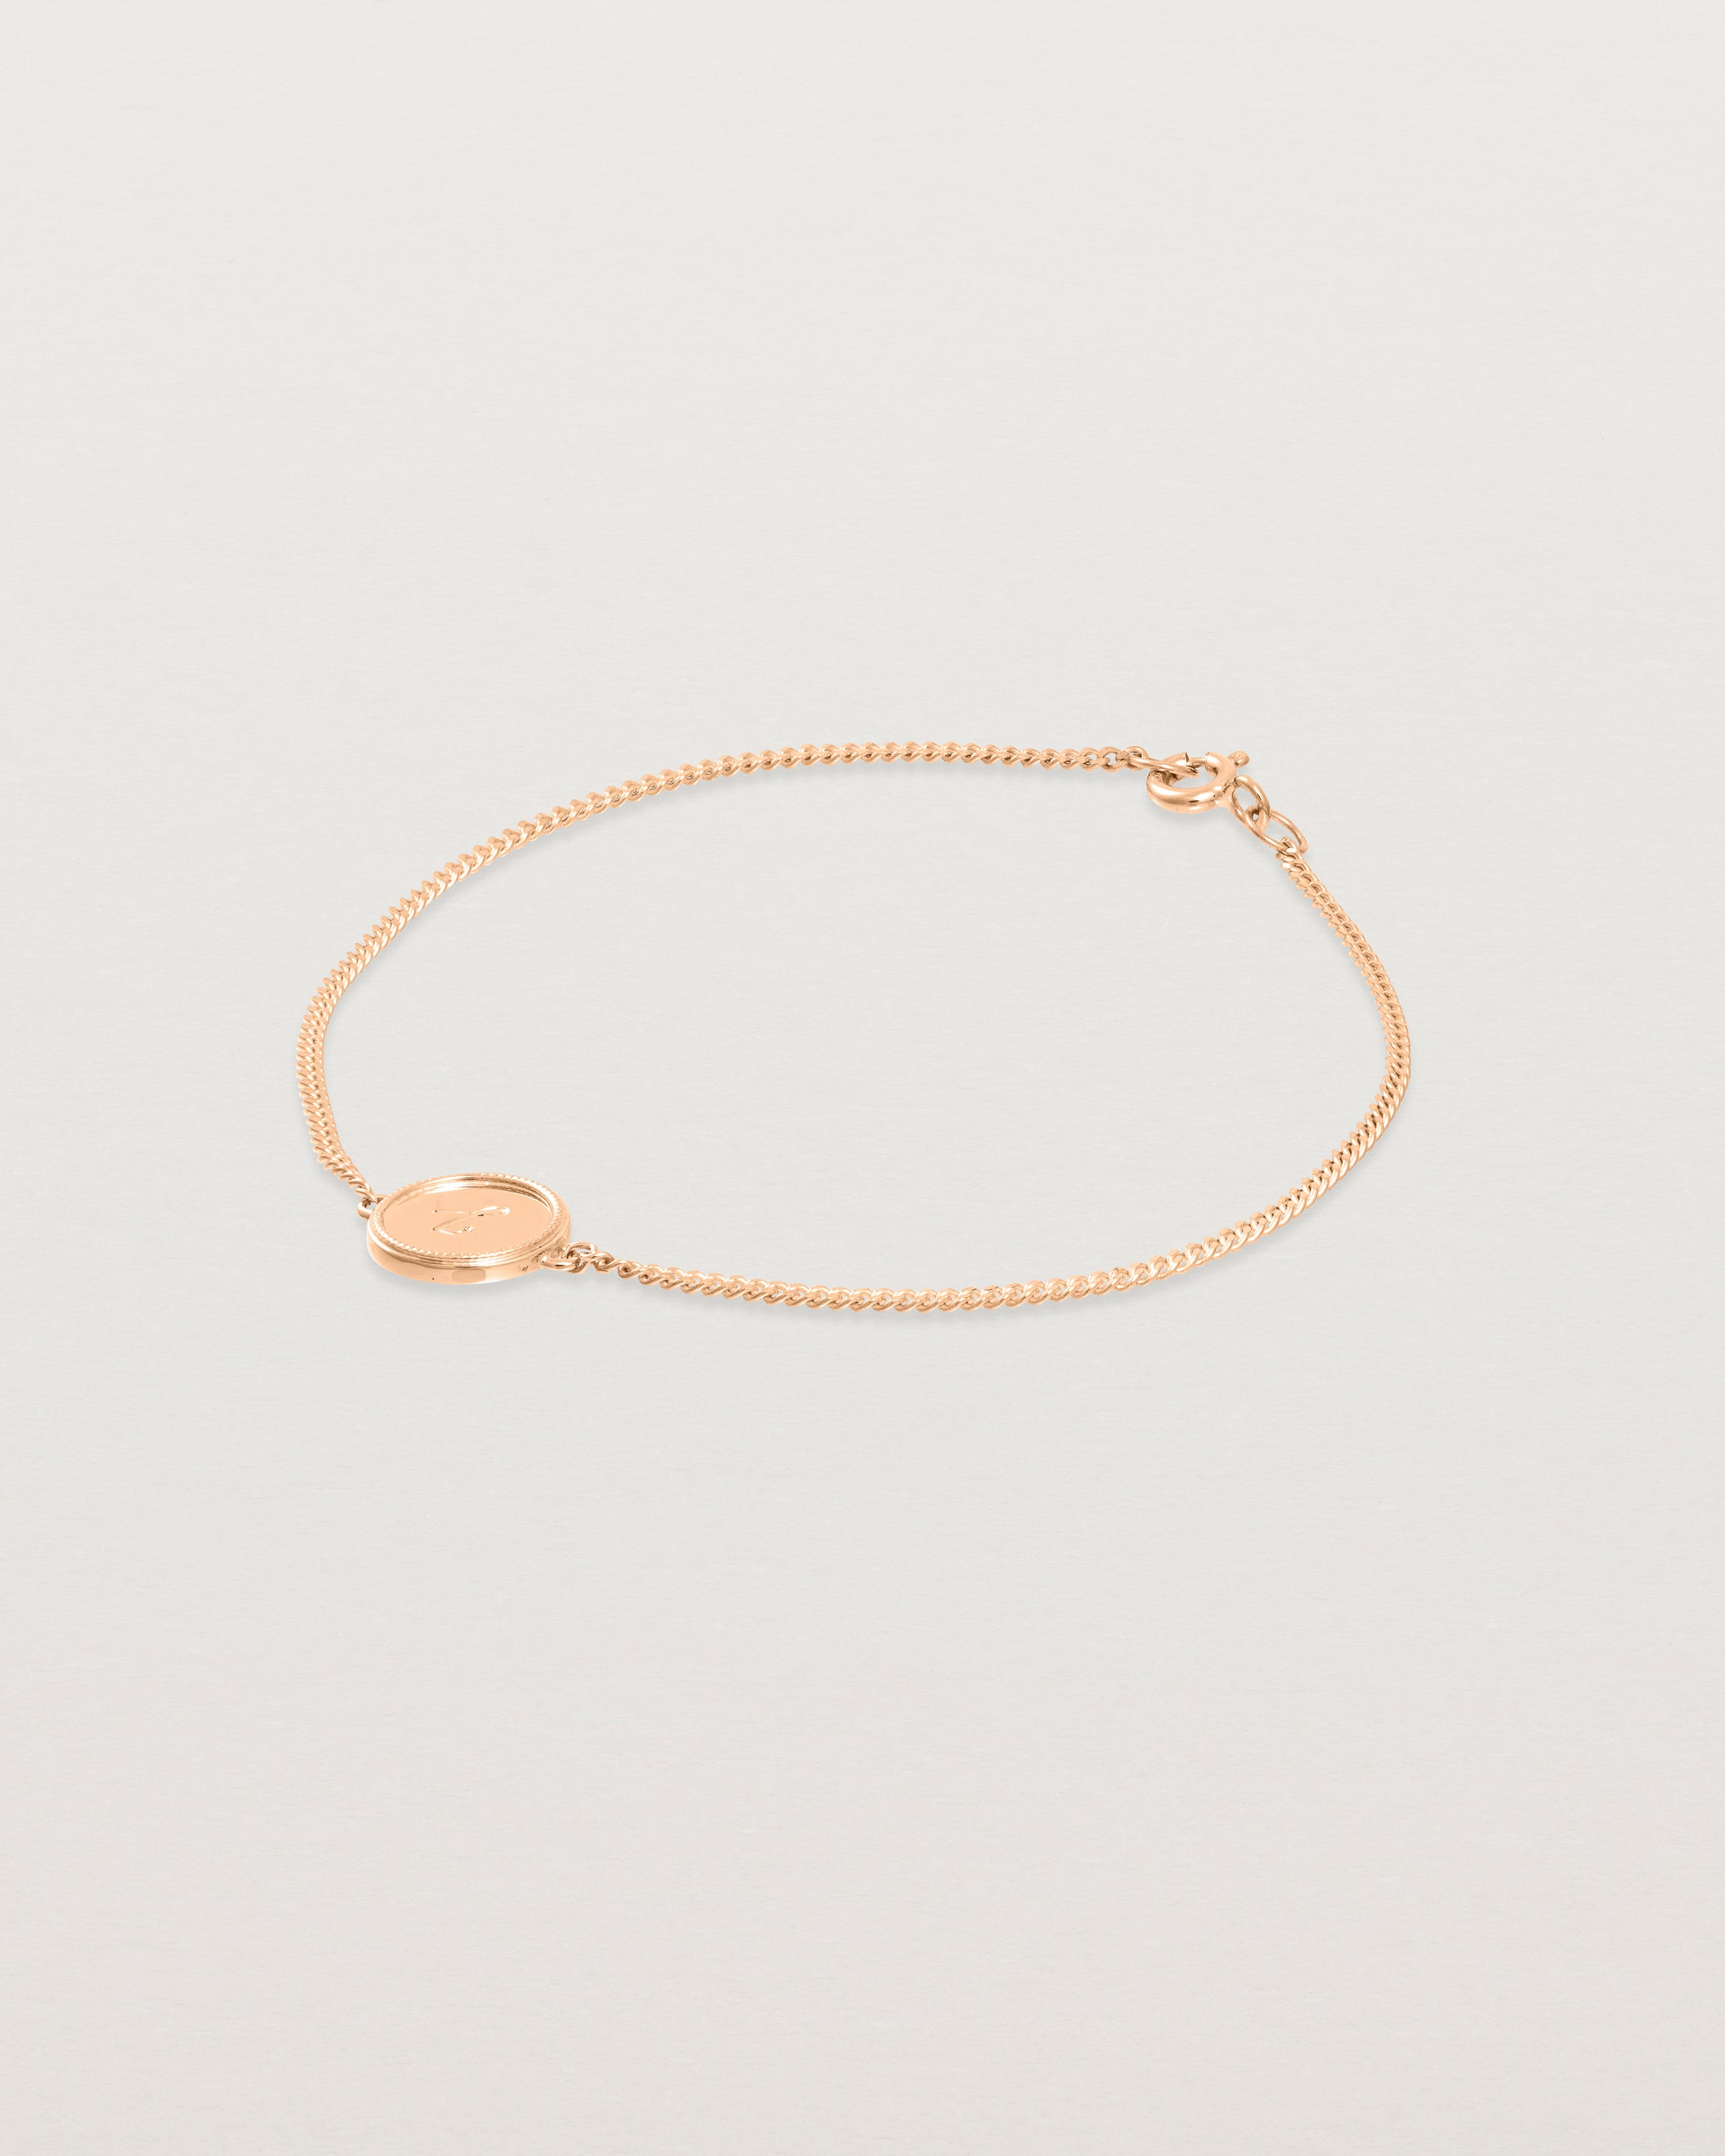 Angled view of the Precious Initial Bracelet in rose gold.